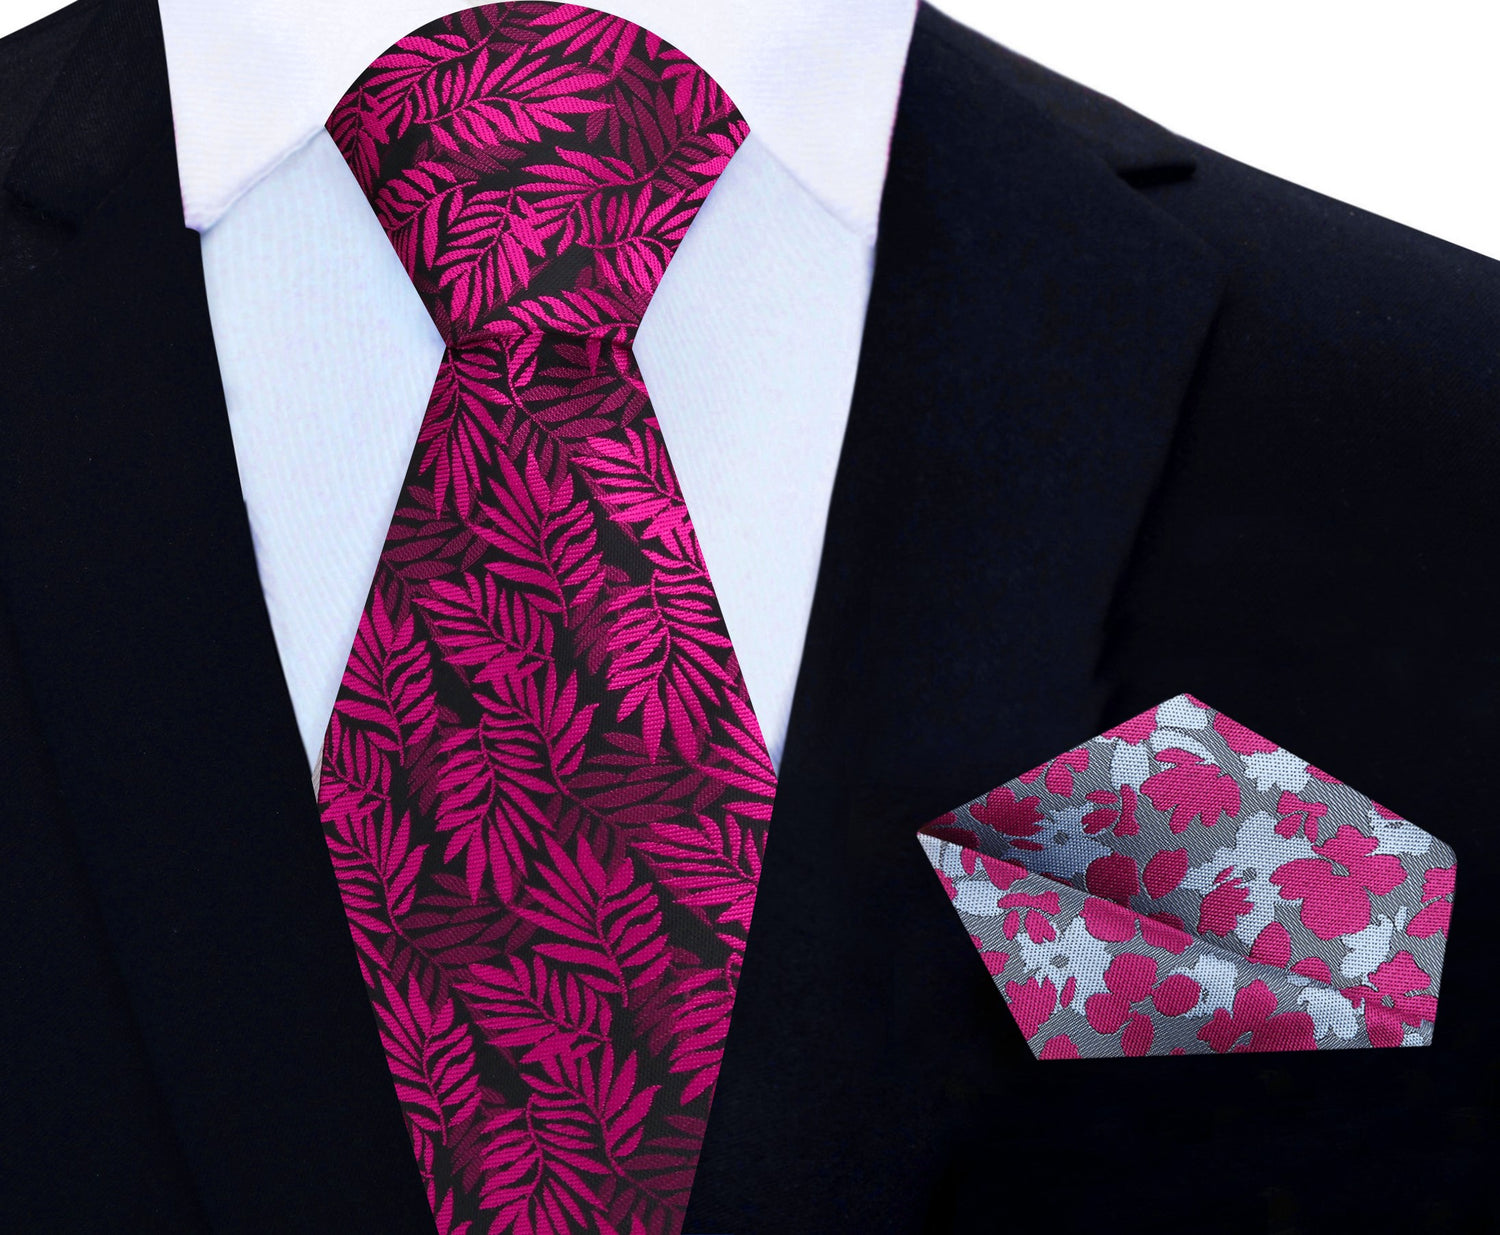 Black with Reddish Pink Leaves Necktie and Grey, Red Sketched Flowers Square